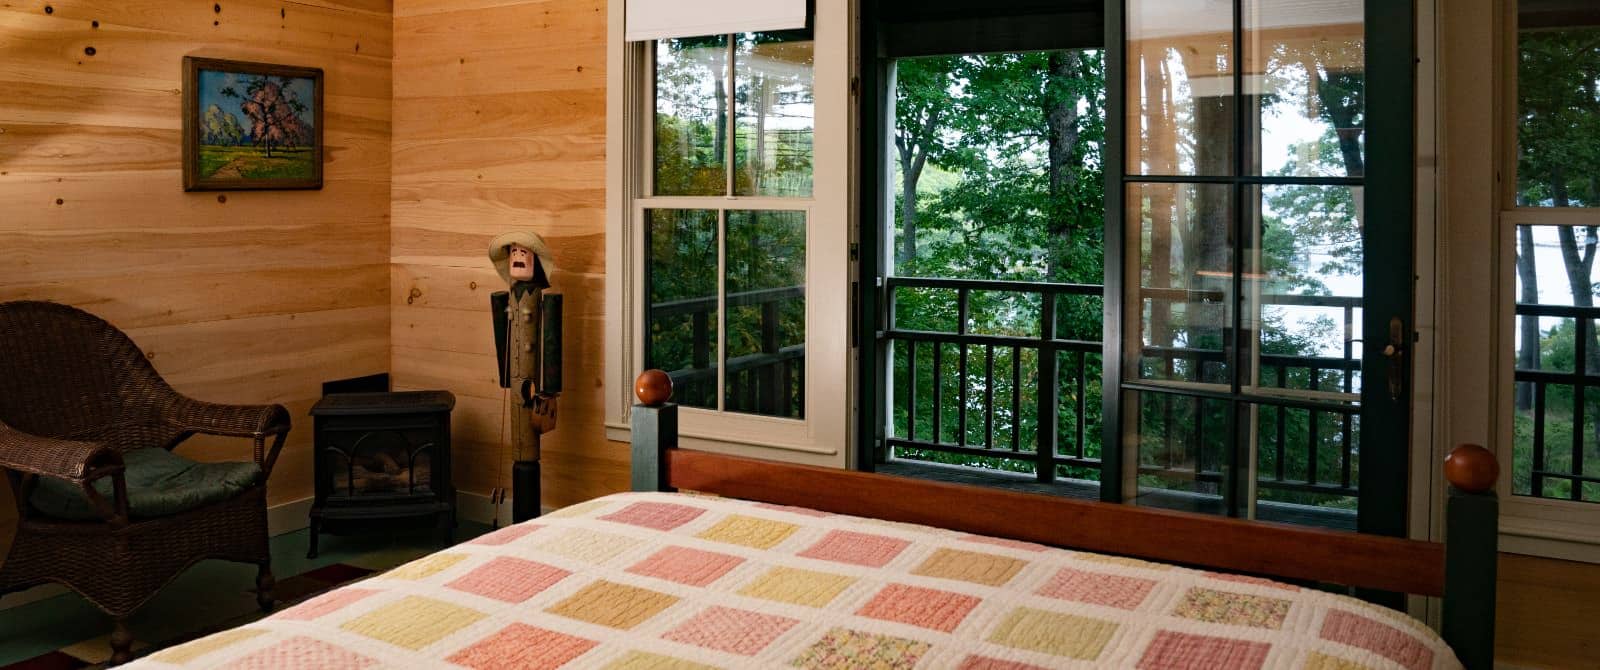 Cozy bedroom with wooden paneling, doors leading to patio and a bed made up with a pretty pastel quilt.